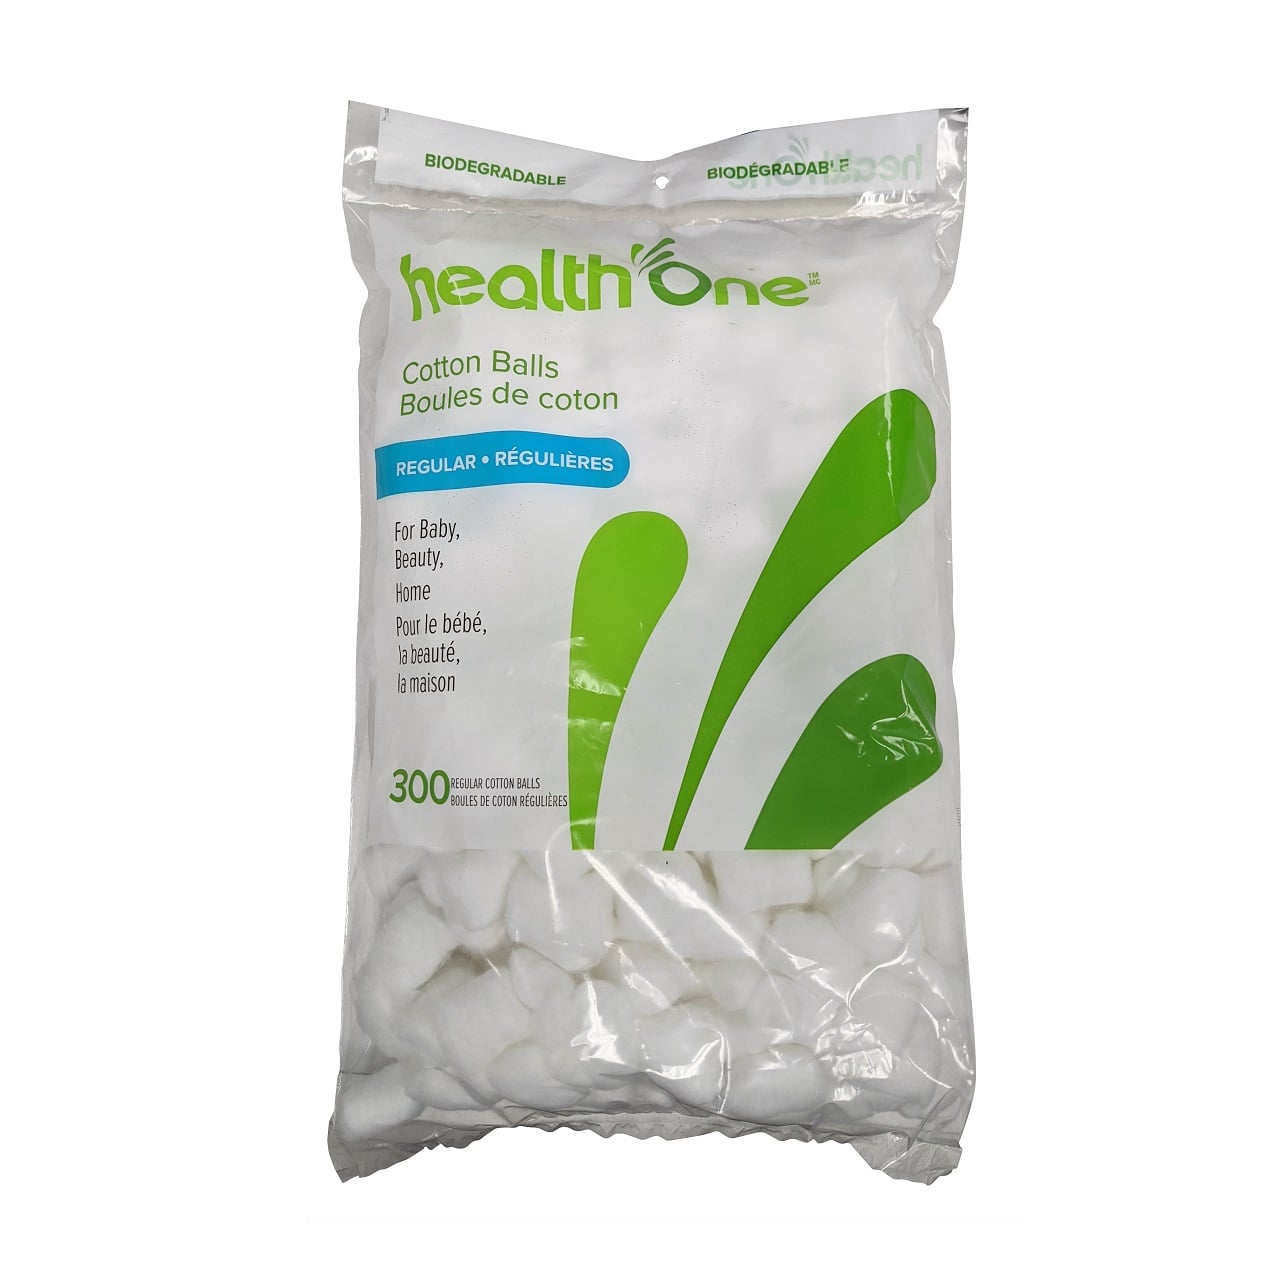 Product label for health One Cotton Balls Regular Size (100 count) 